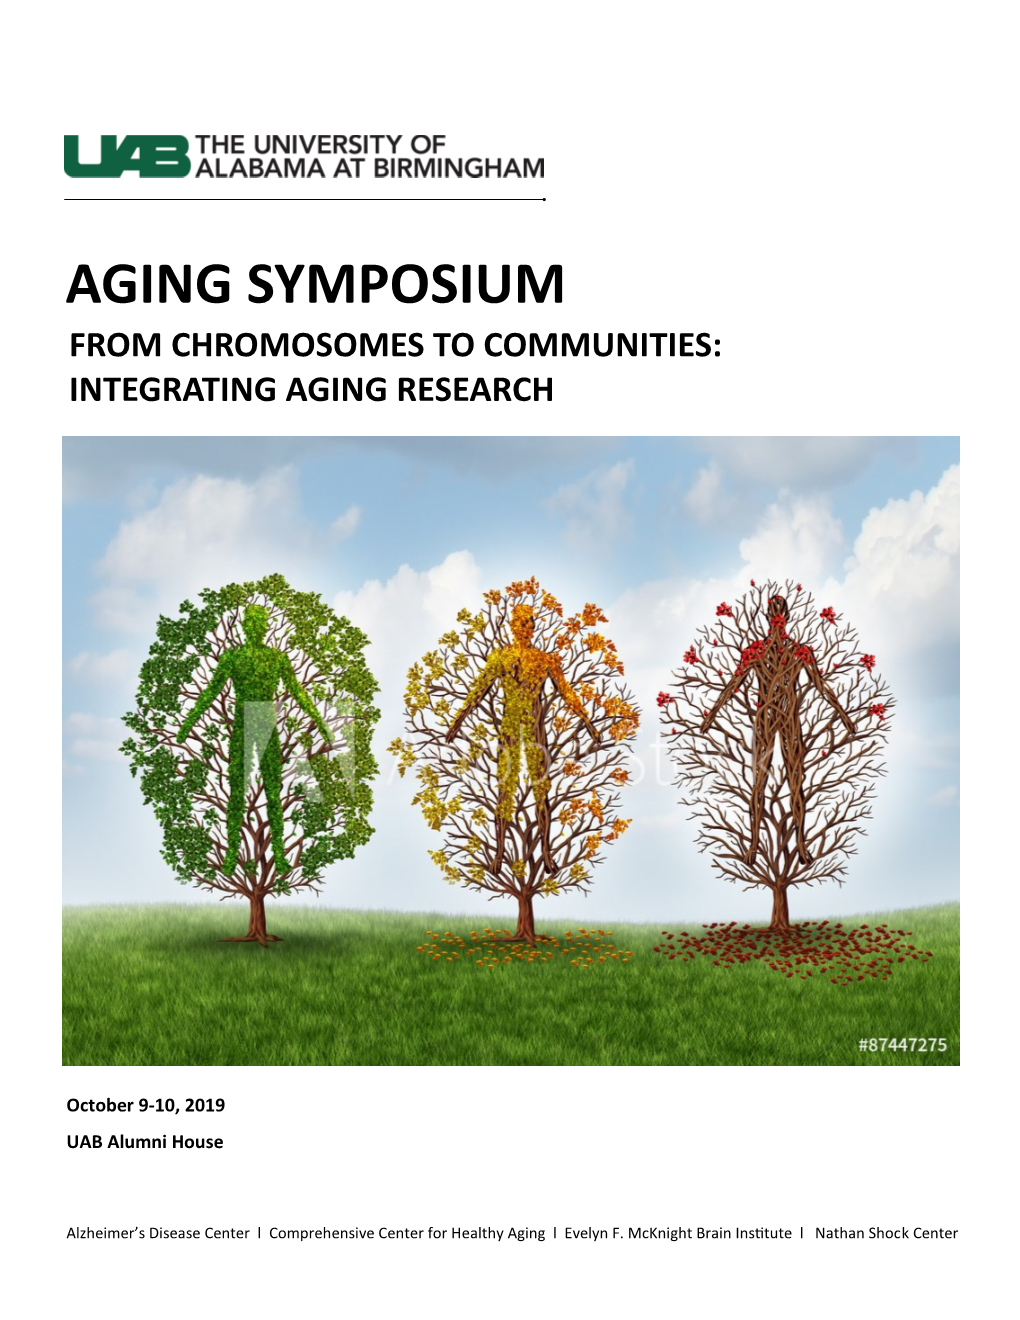 Aging Symposium from Chromosomes to Communities: Integrating Aging Research